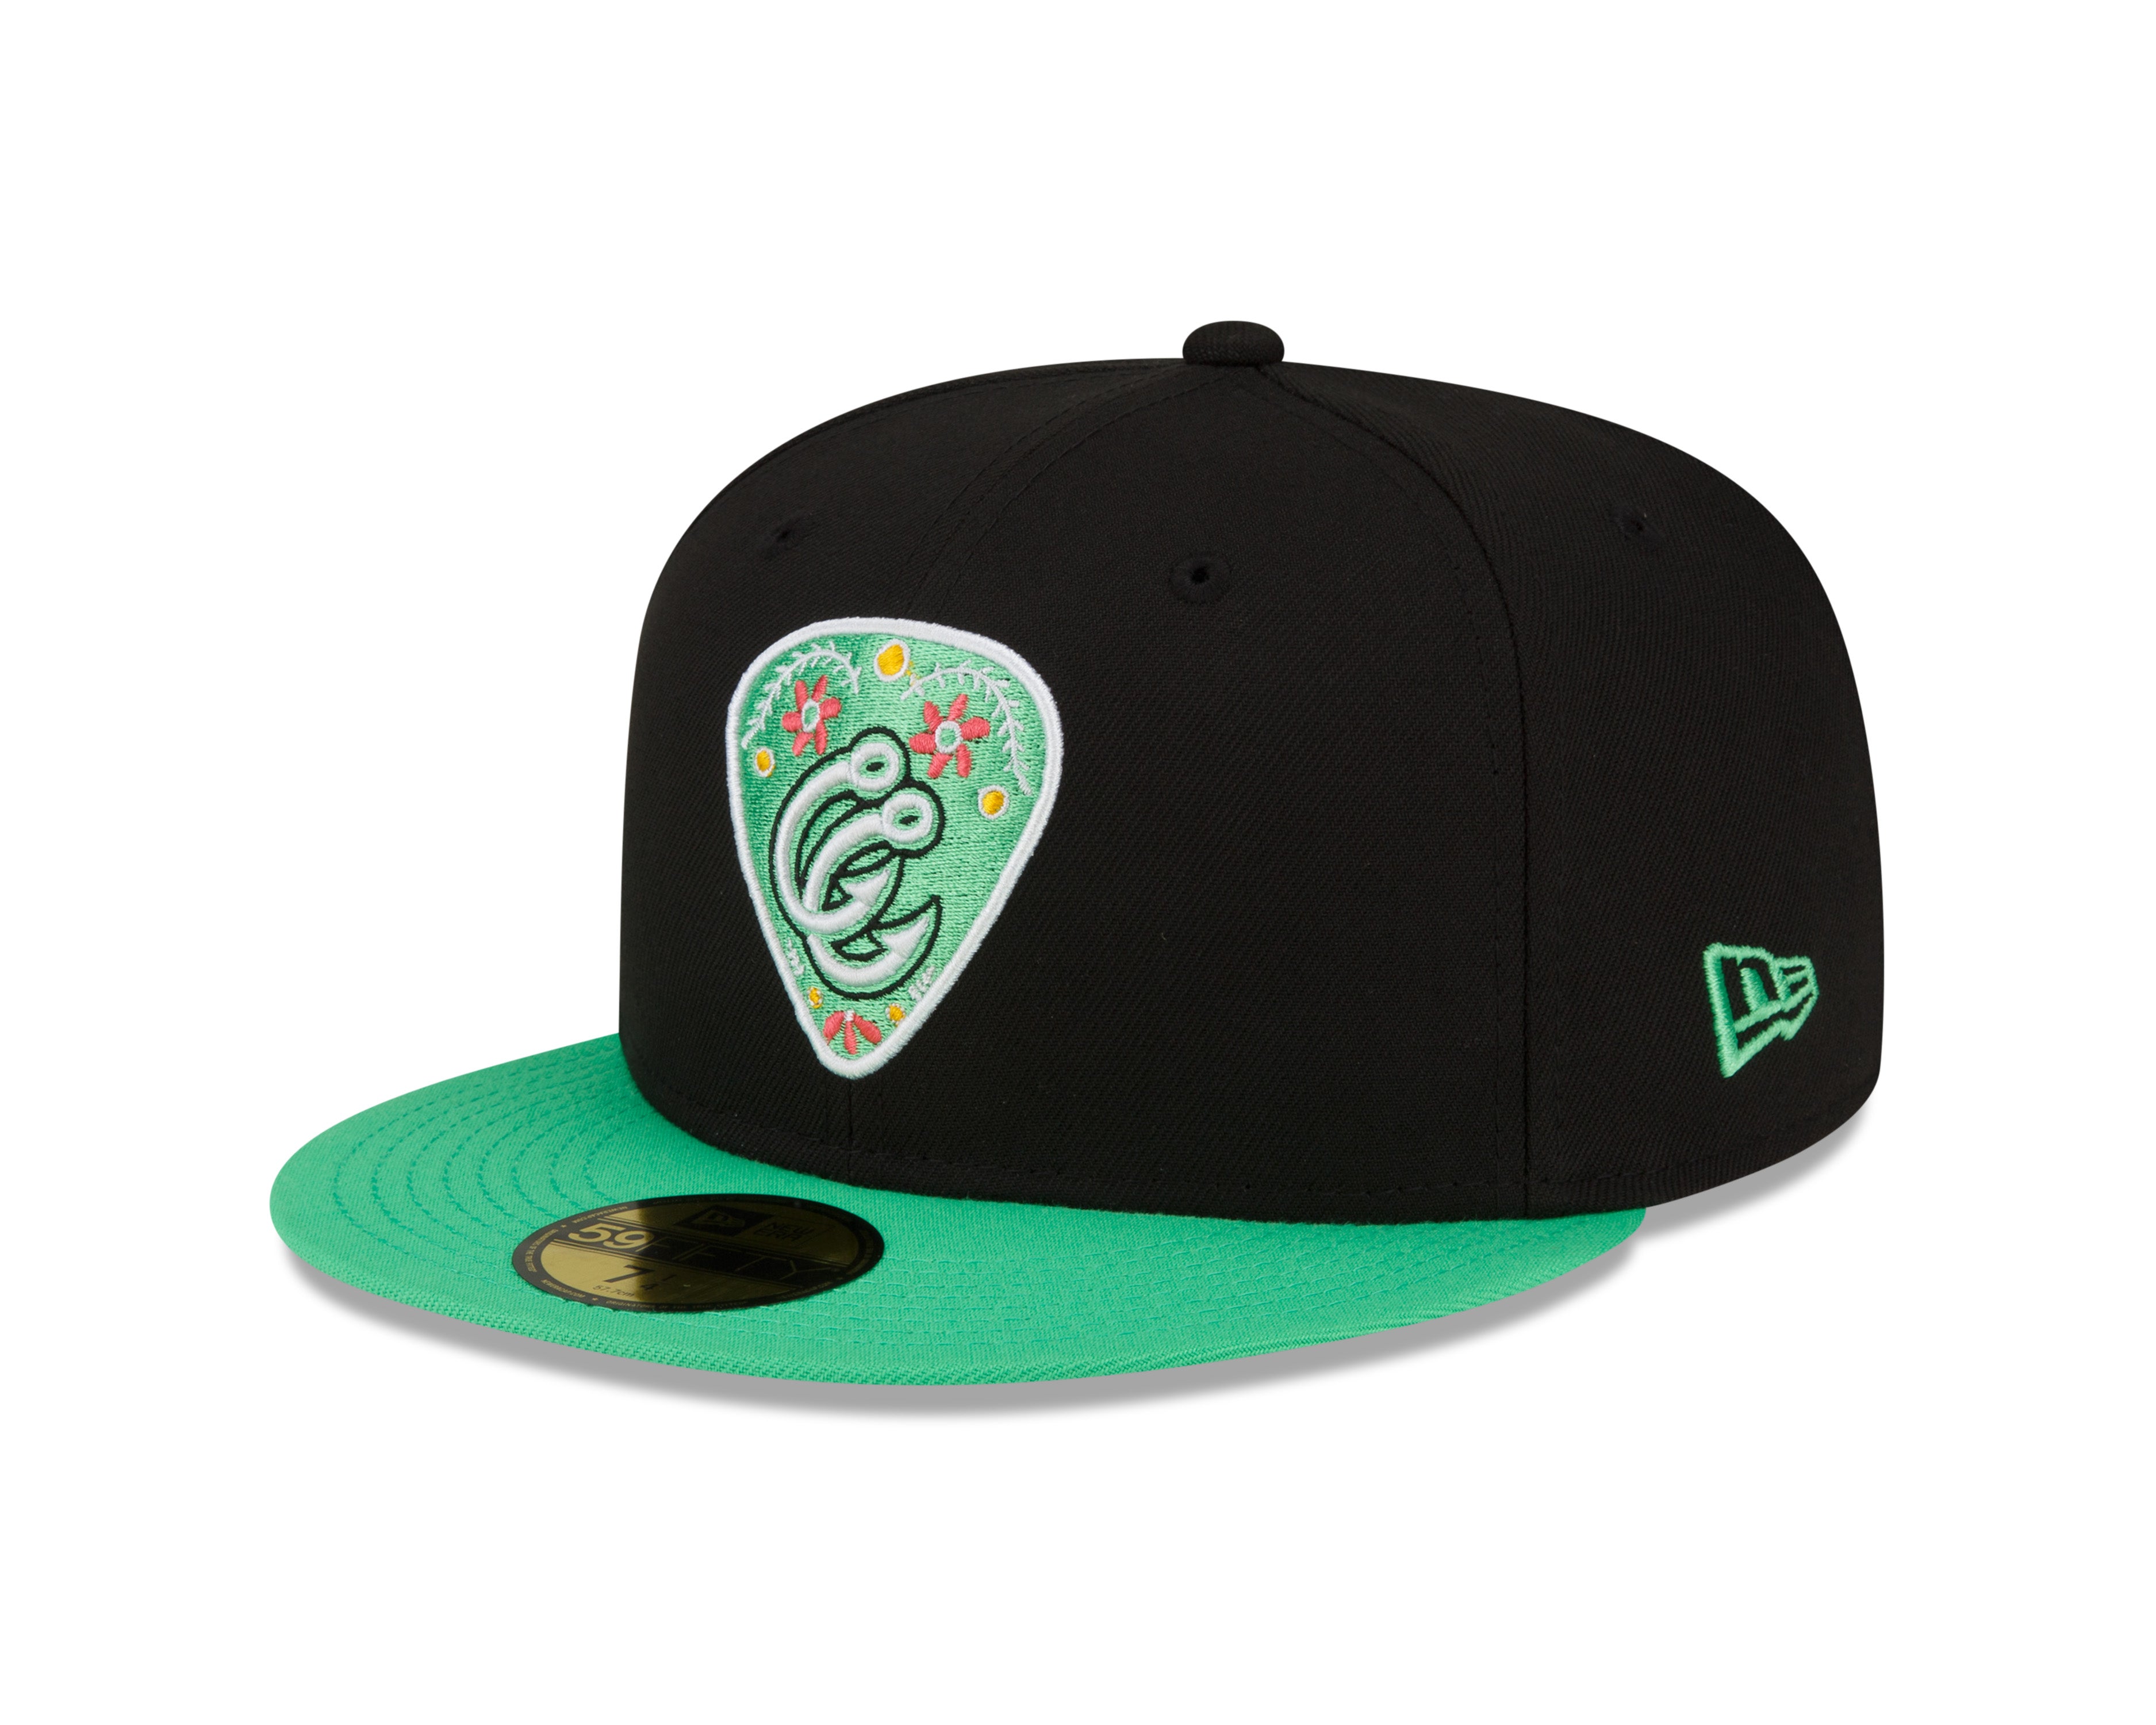 New Era - 59Fifty Fitted - Low Profile - Authentic On-Field Fauxback Cap 